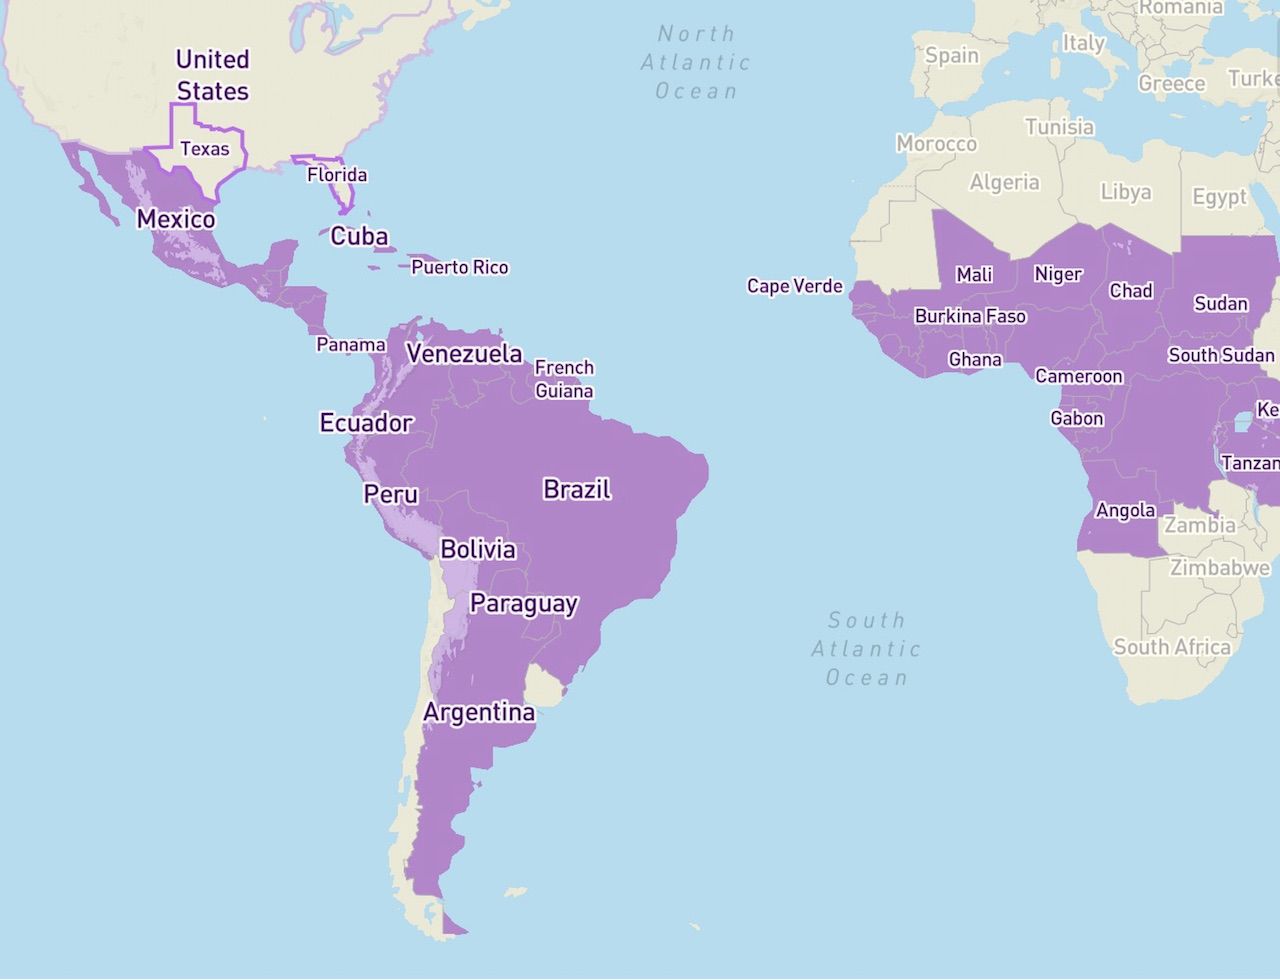 In what countries is the Zika virus active?